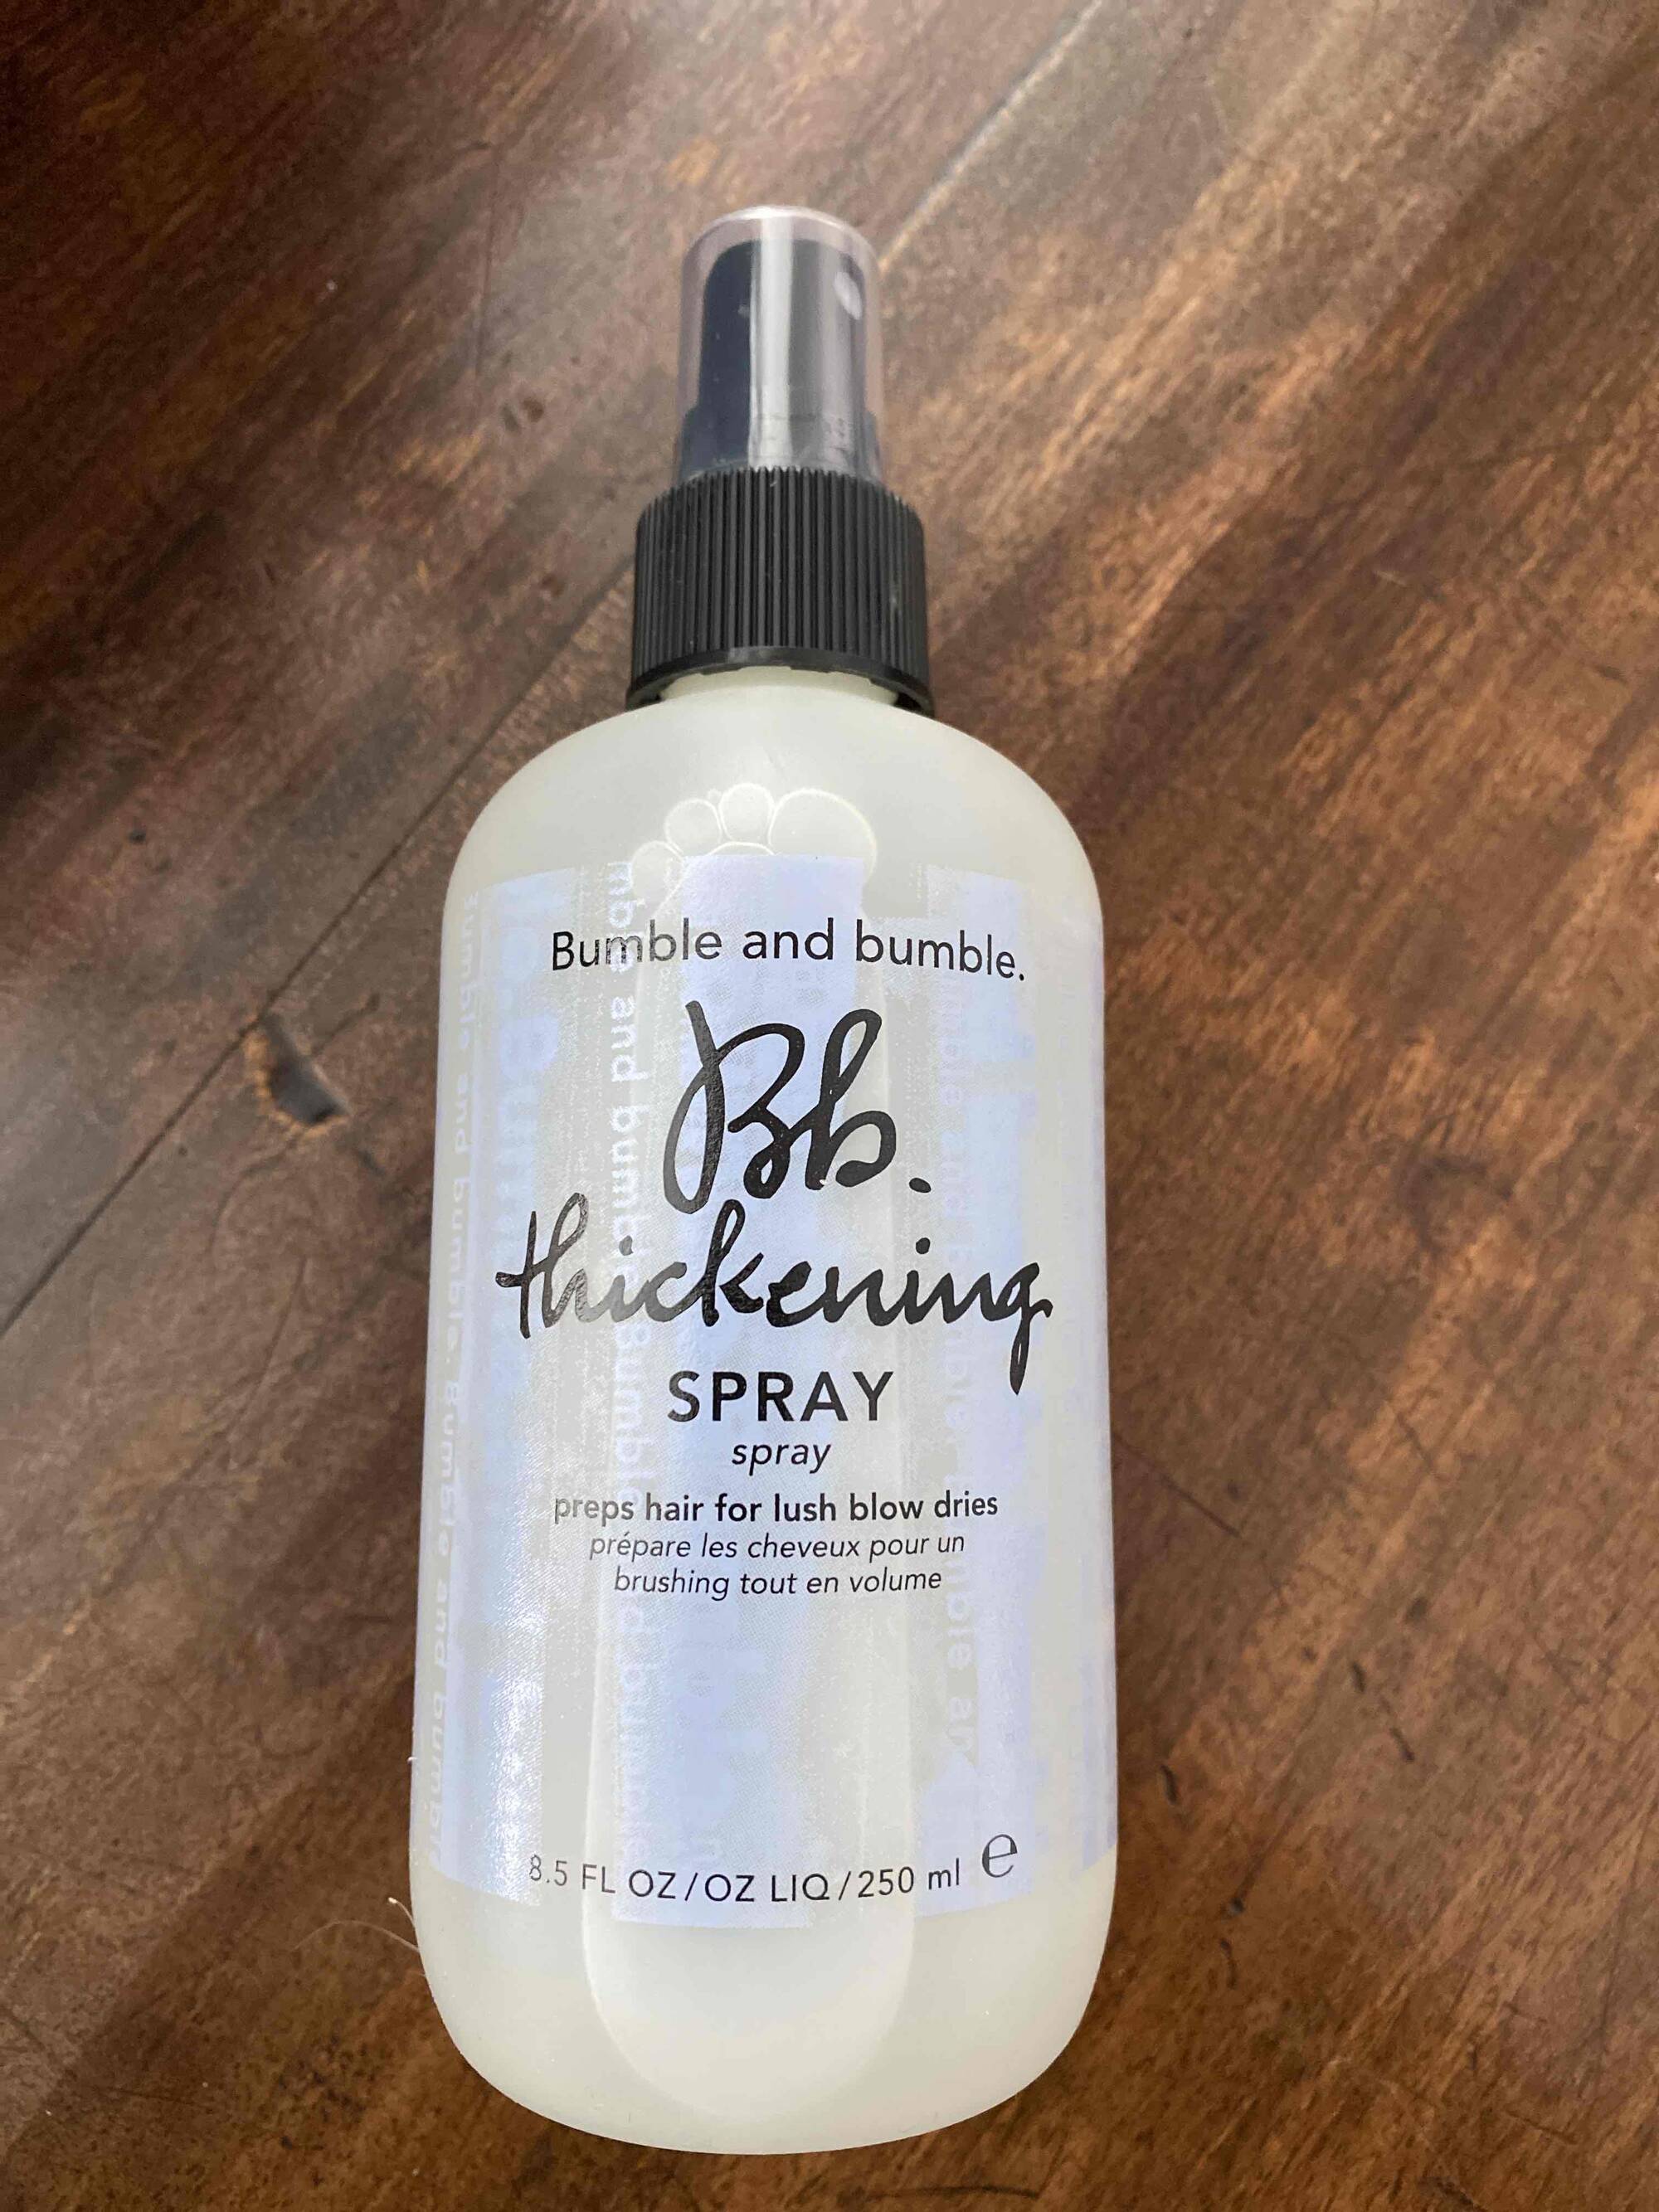 BUMBLE AND BUMBLE - BB thickening spray 